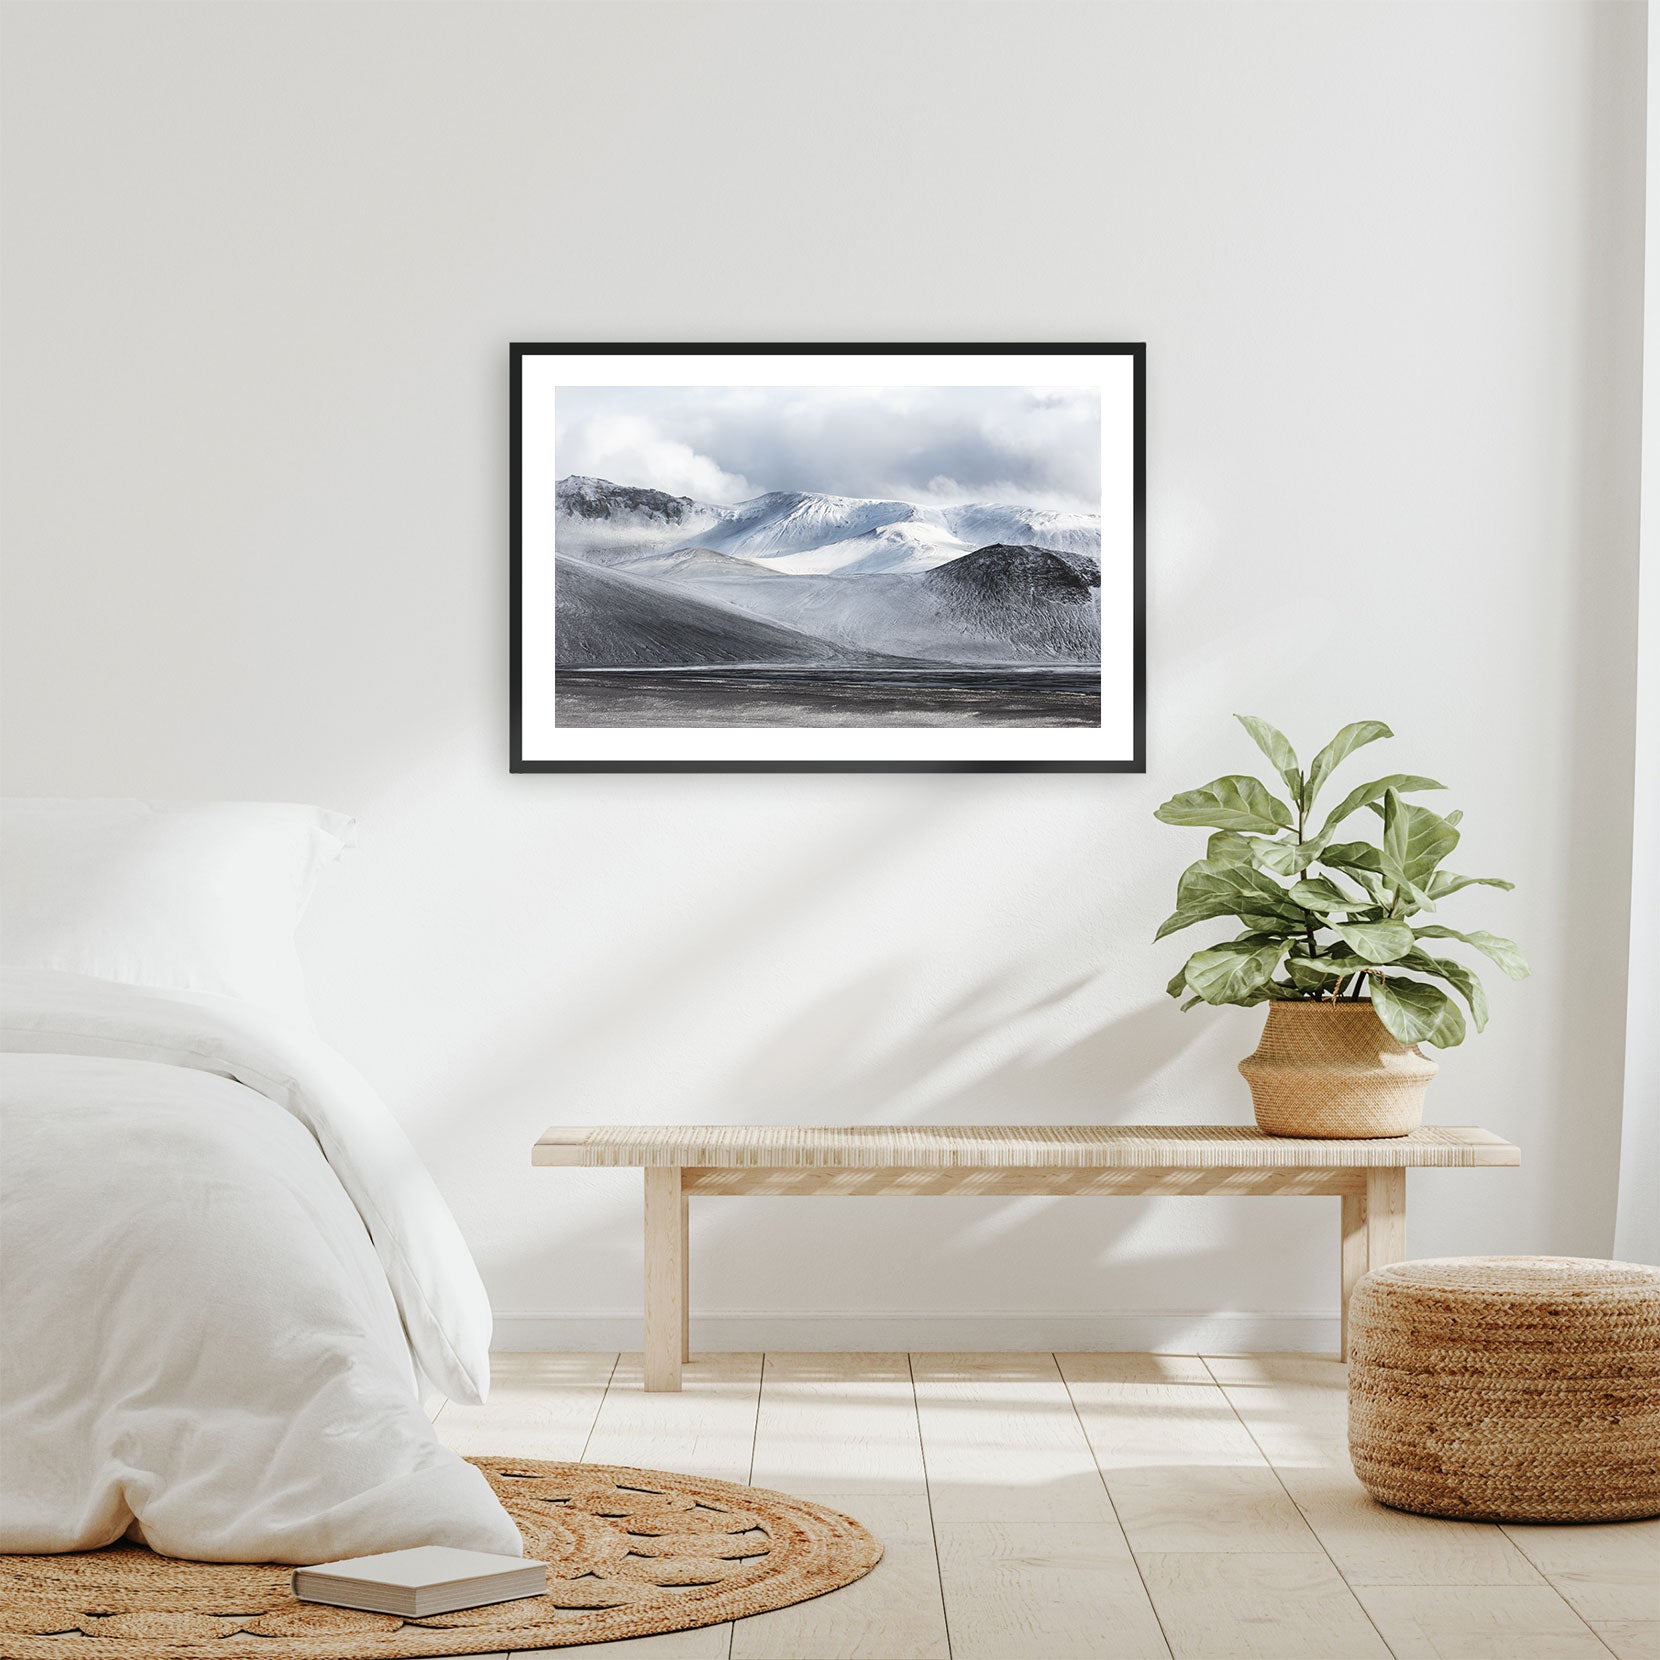 A framed print of a snowy mountain range in Iceland